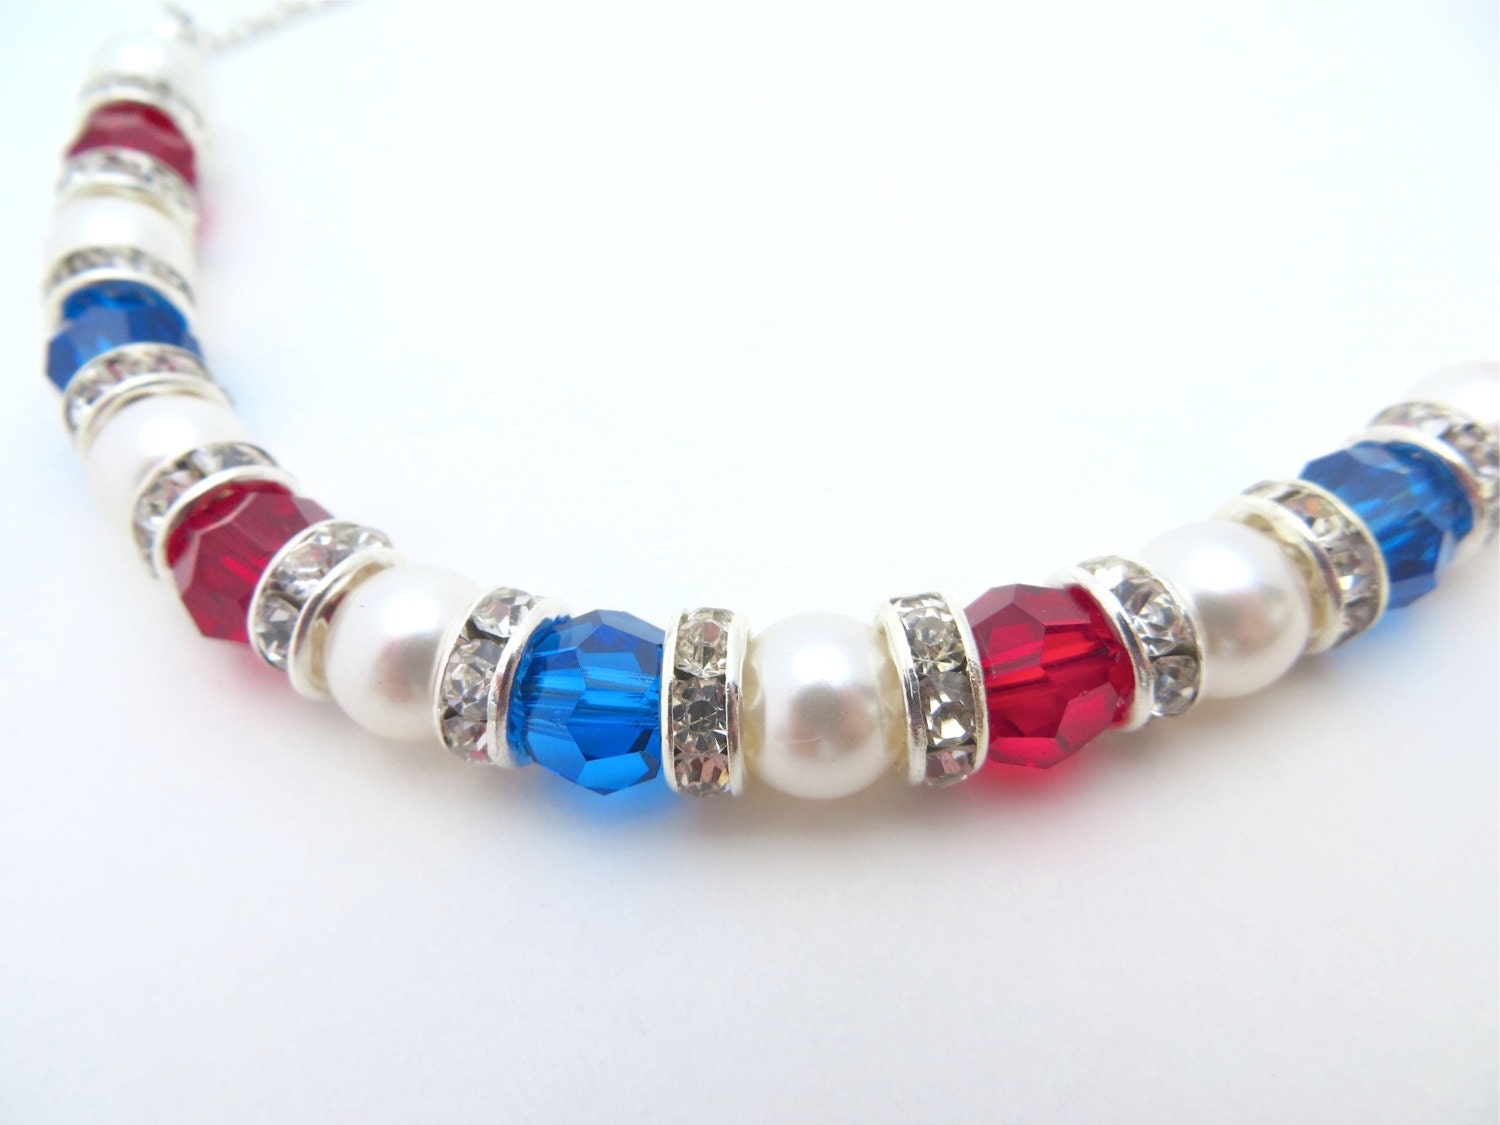 Patriotic Necklace, Red, White and Blue Necklace, Memorial Day Necklace, Forth of July Necklace, USA Necklace With Swarovski Crystal Pearl - LucidDreamsJewelry